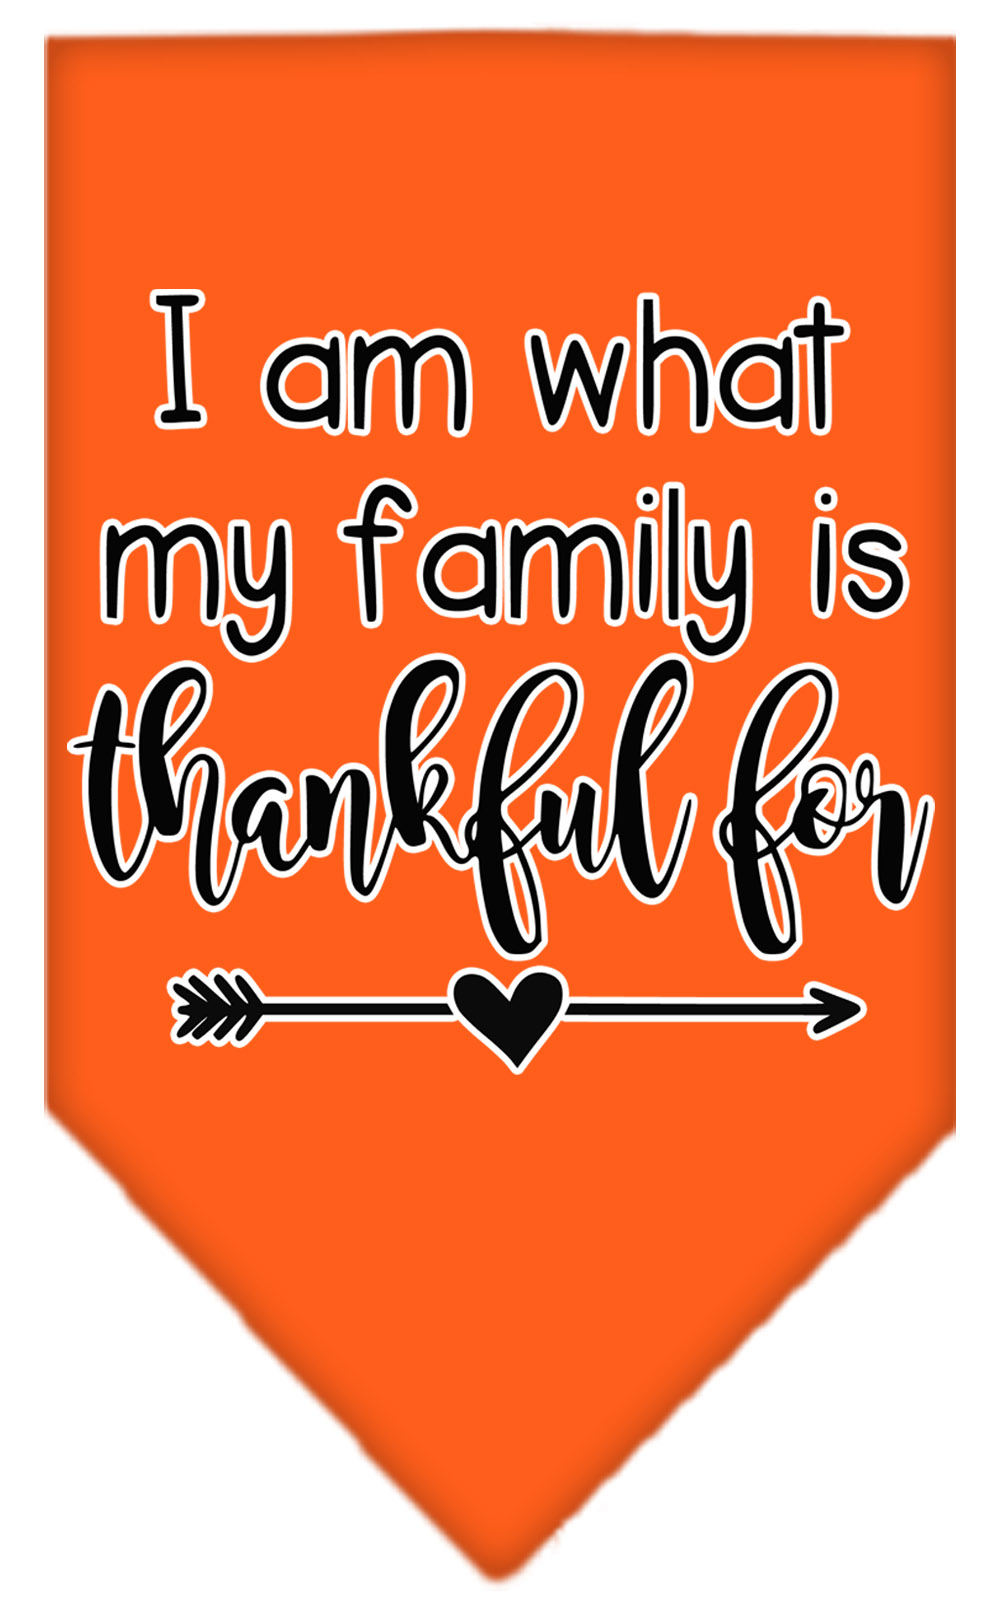 I Am What My Family is Thankful For Screen Print Bandana Orange Small